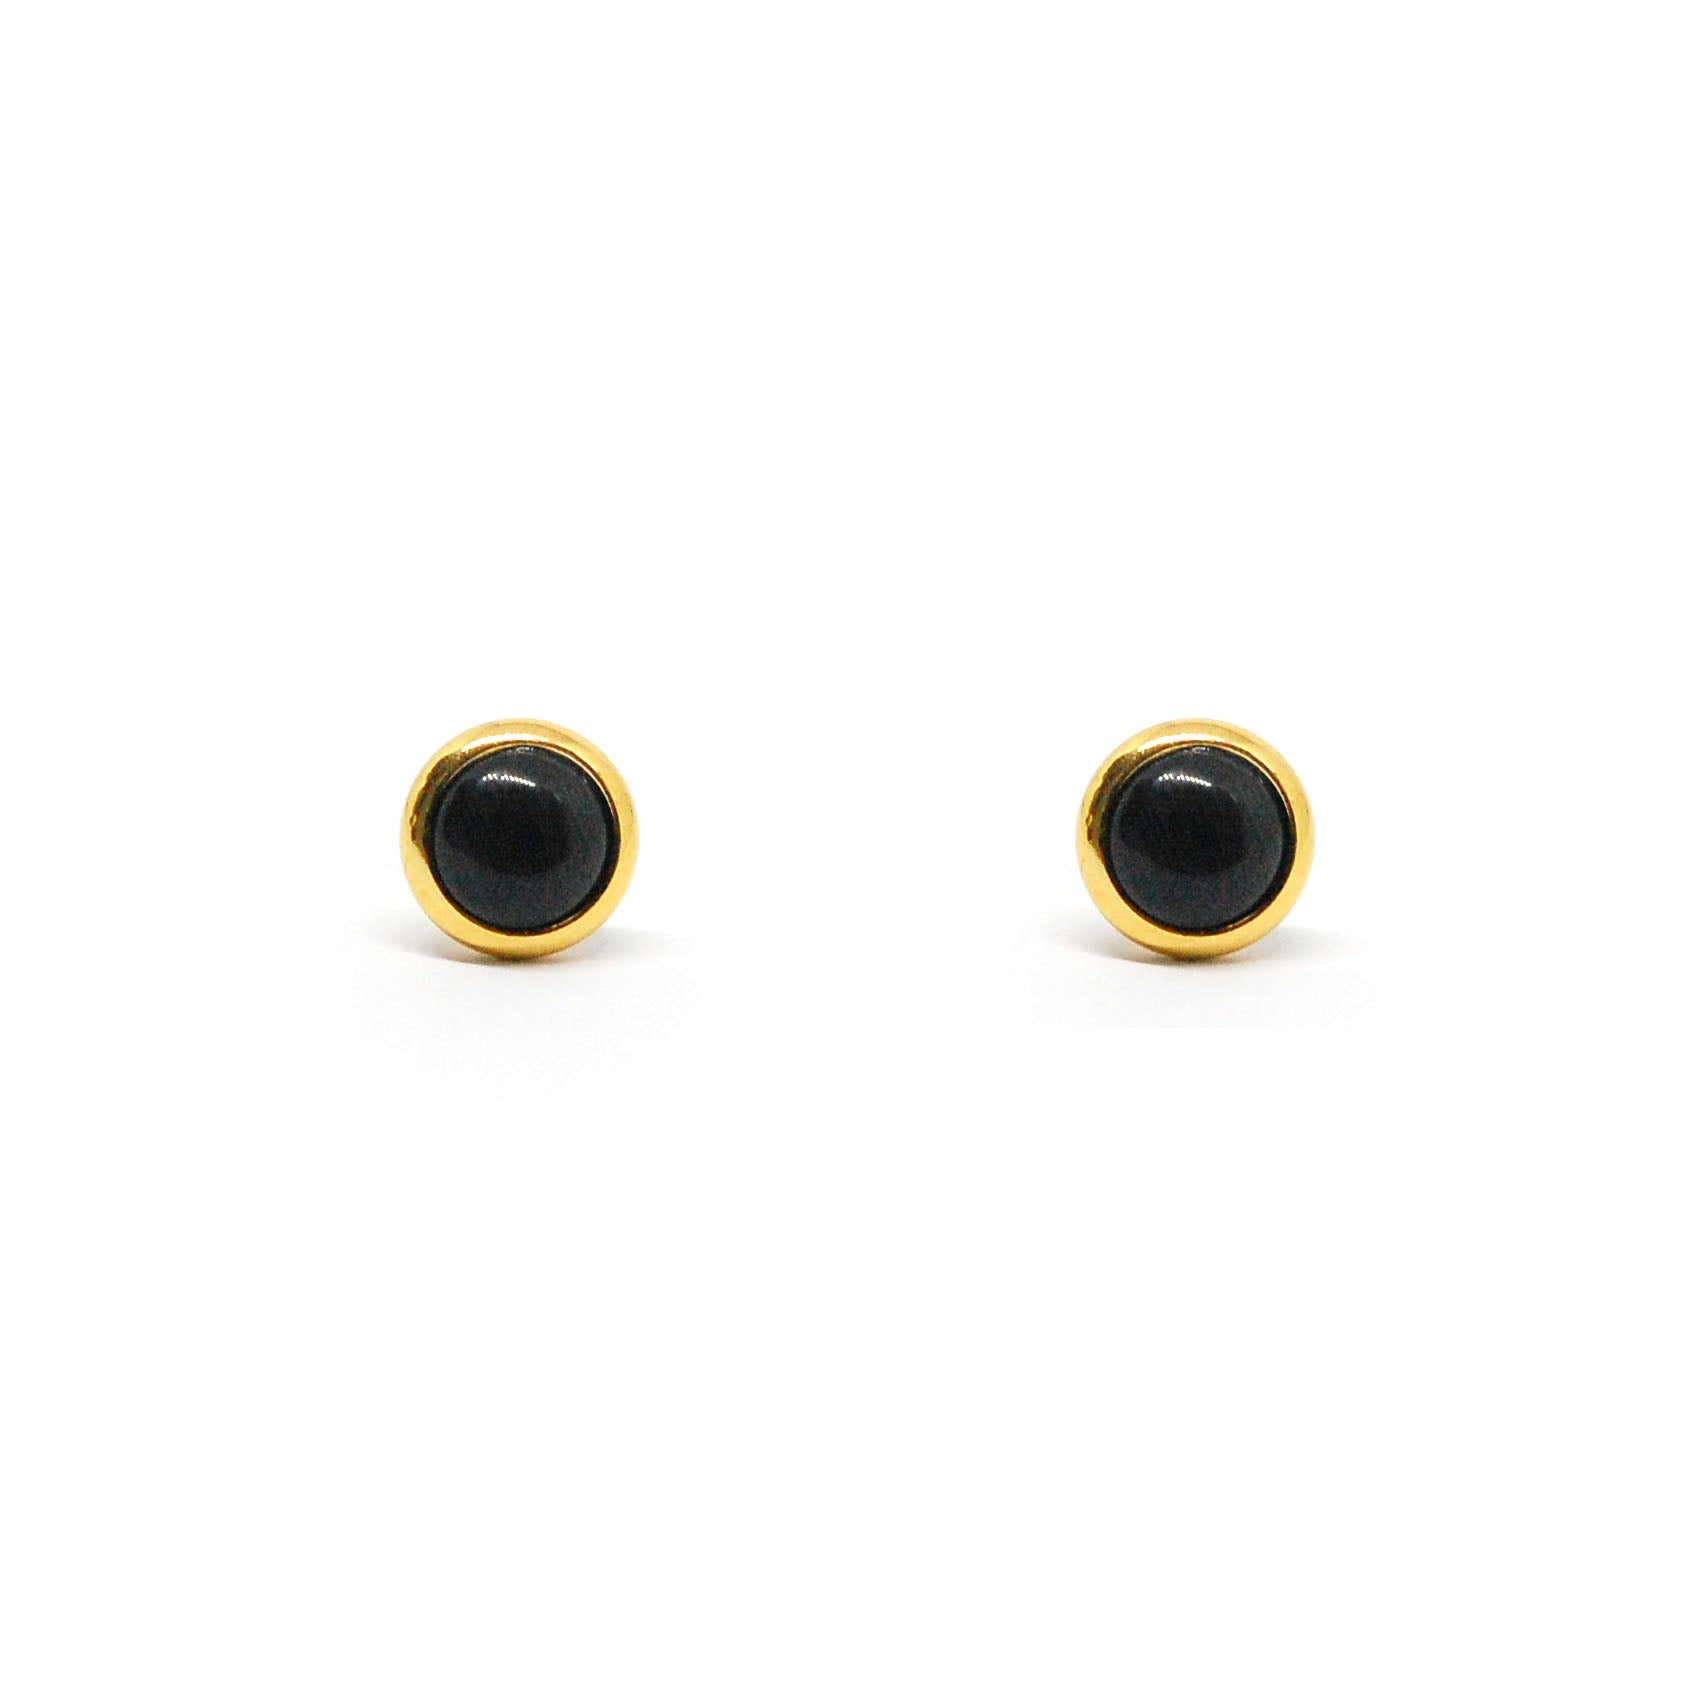 ESE 8079: All IPG Enclosed 6mm Speial Stone Studs w/ Baby Safe Chapita